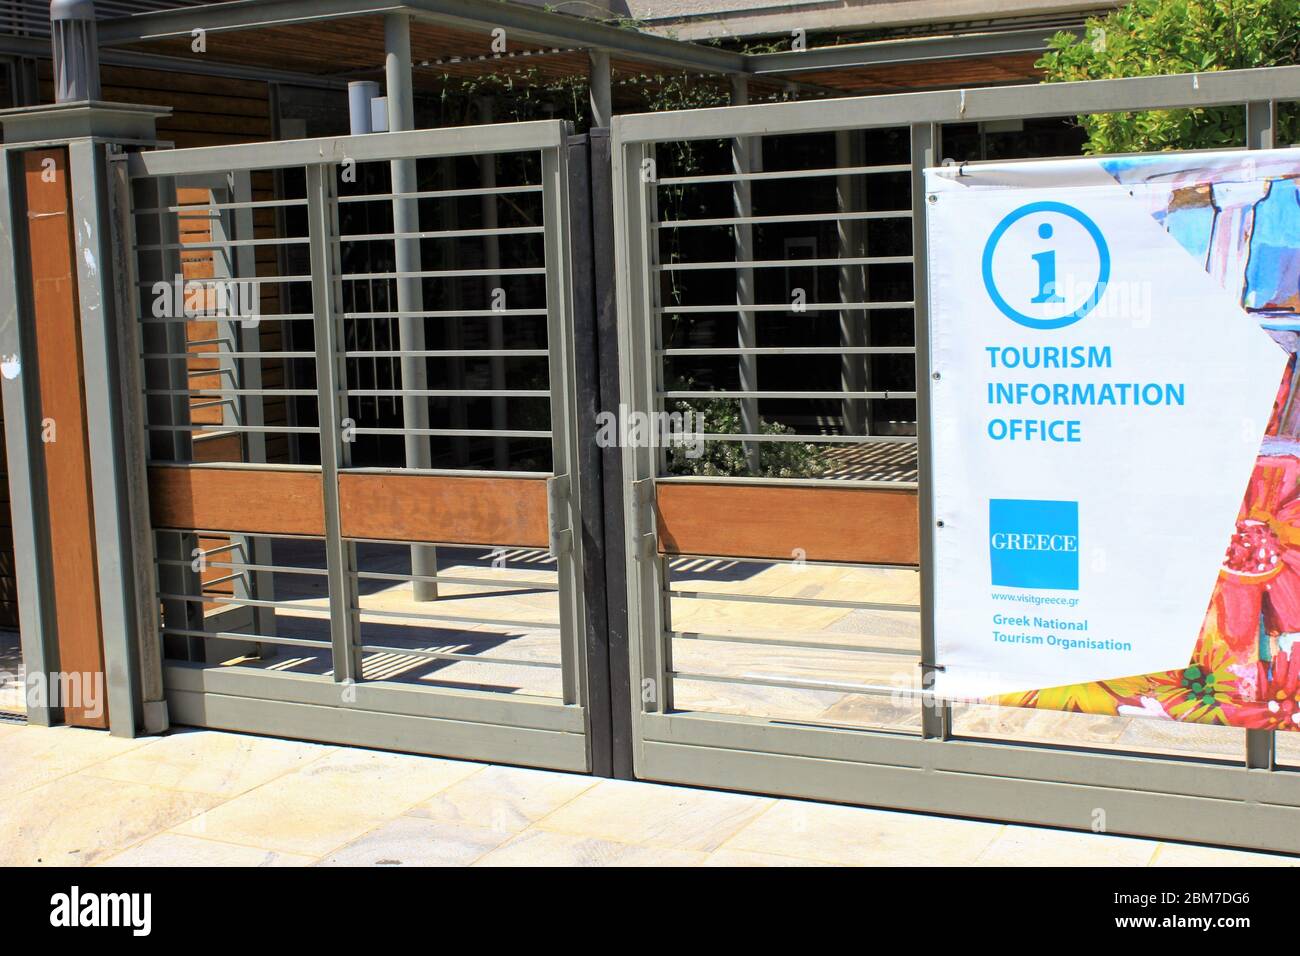 Athens, Greece, May 6 2020 - Closed tourism information office during the Coronavirus lockdown. Stock Photo